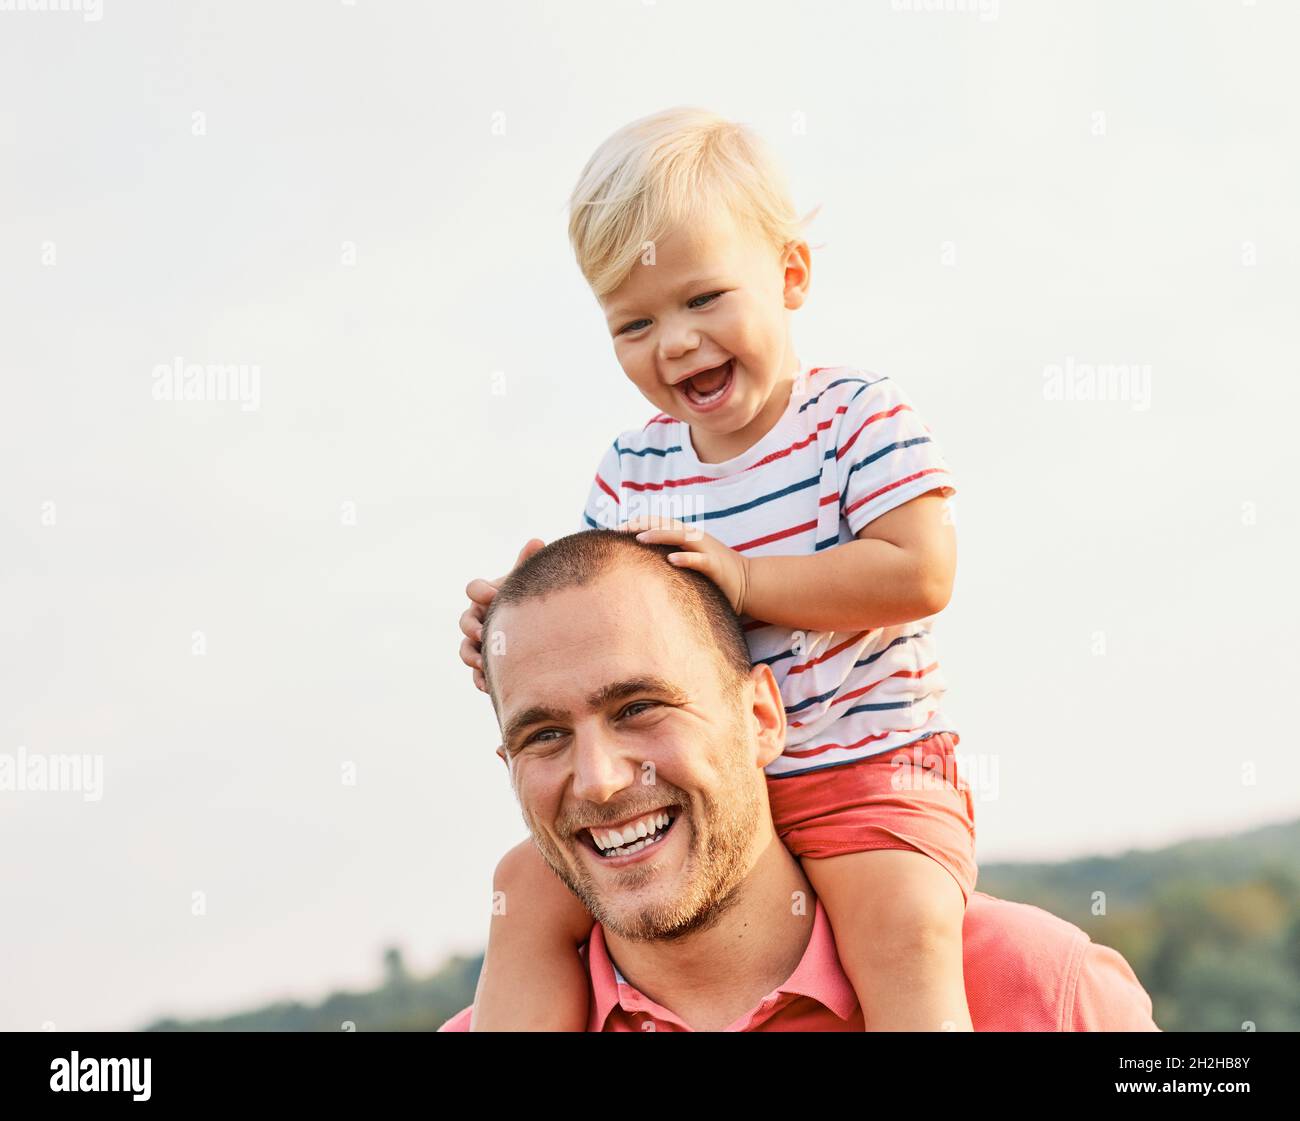 child family outdoor man father boy son happy happiness lifestyle having fun bonding together smiling Stock Photo